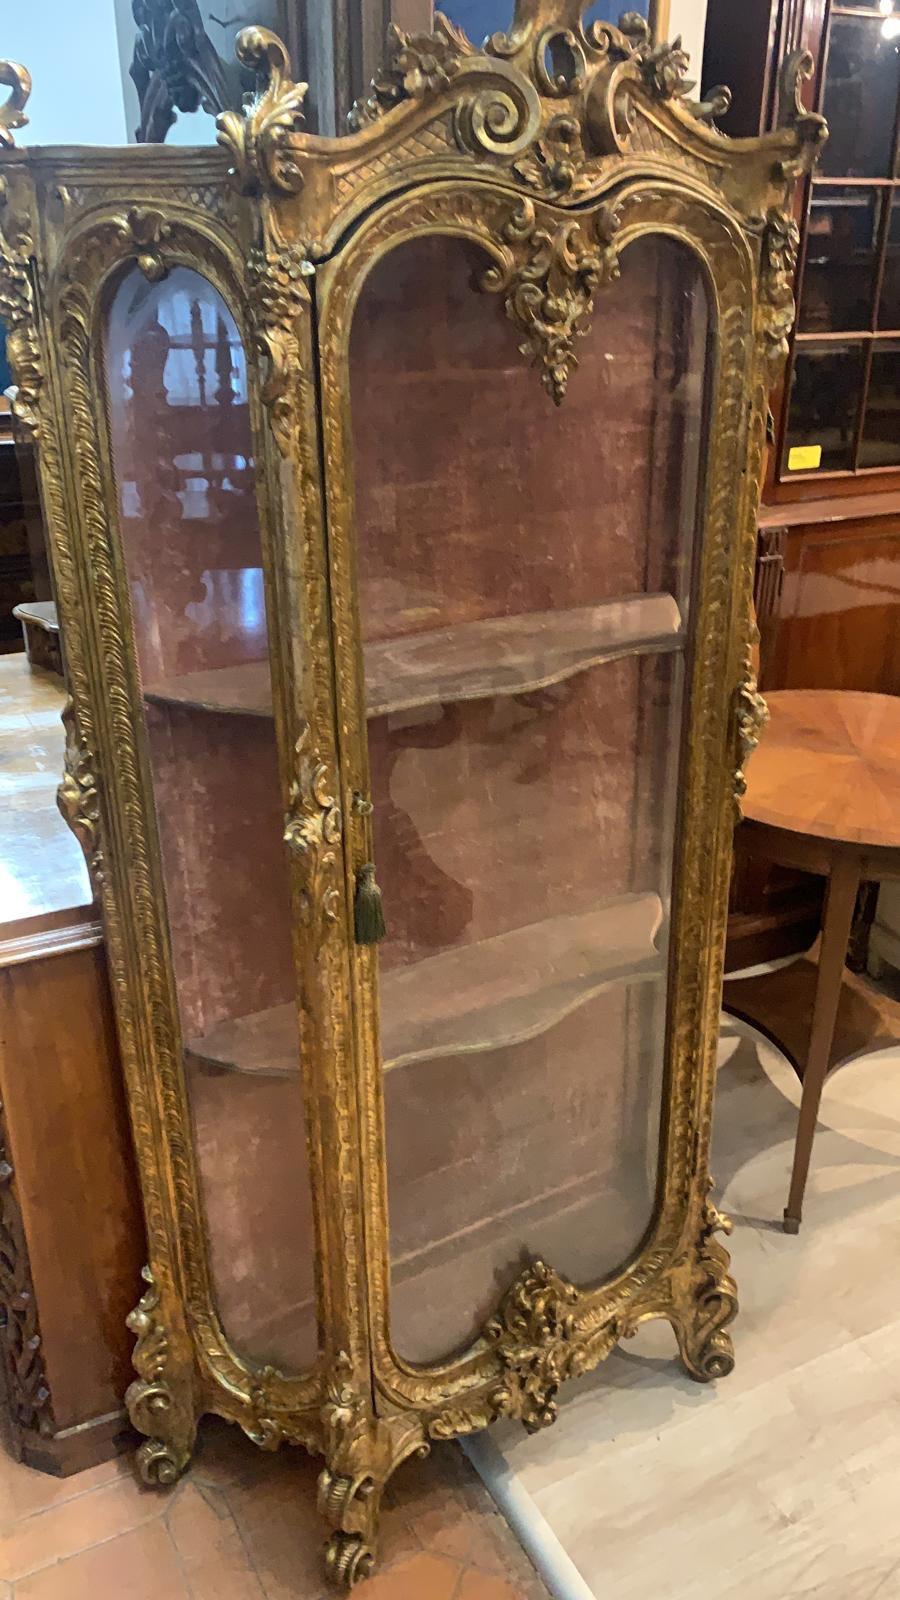 French display cabinet, of great quality, entirely made of wood carved and gilded in pure gold. Finely carved and with harmonious shapes that make it elegant and never too pompous. Extremely small in size to be easily placed anywhere in your